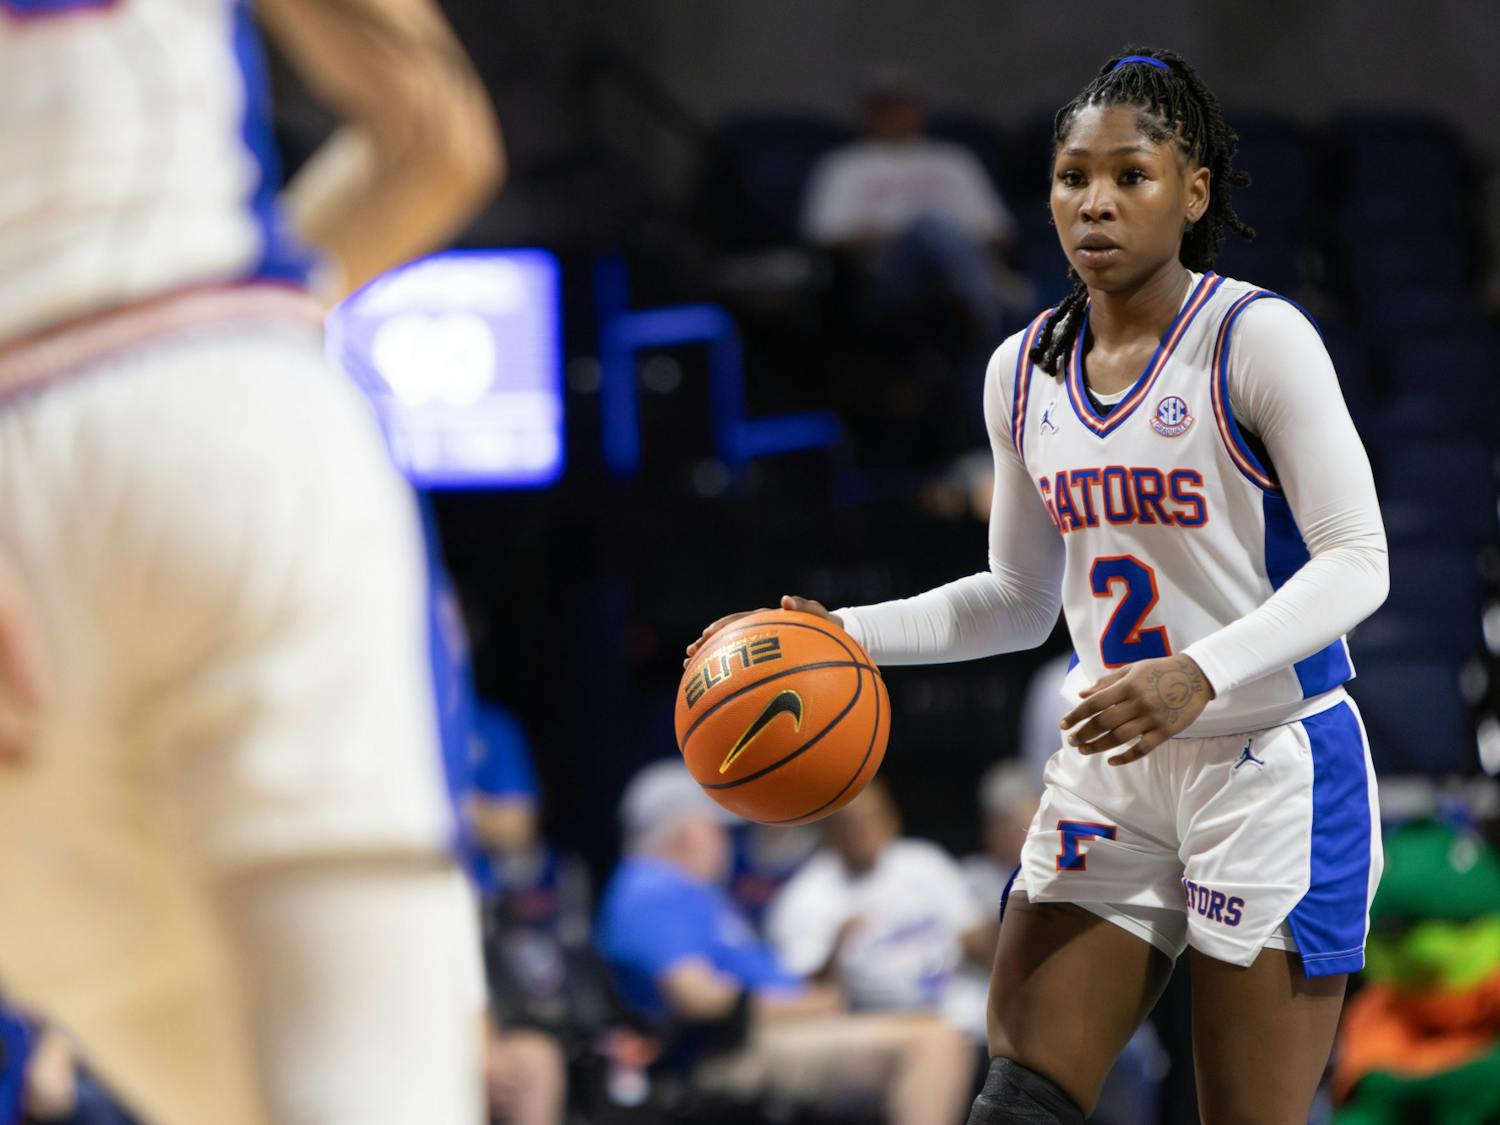 Senior guard Aliyah Matharu dribbles the ball on the Gators’ home court in Florida’s 77-74 loss against the Auburn Tigers, March 3, 2024.